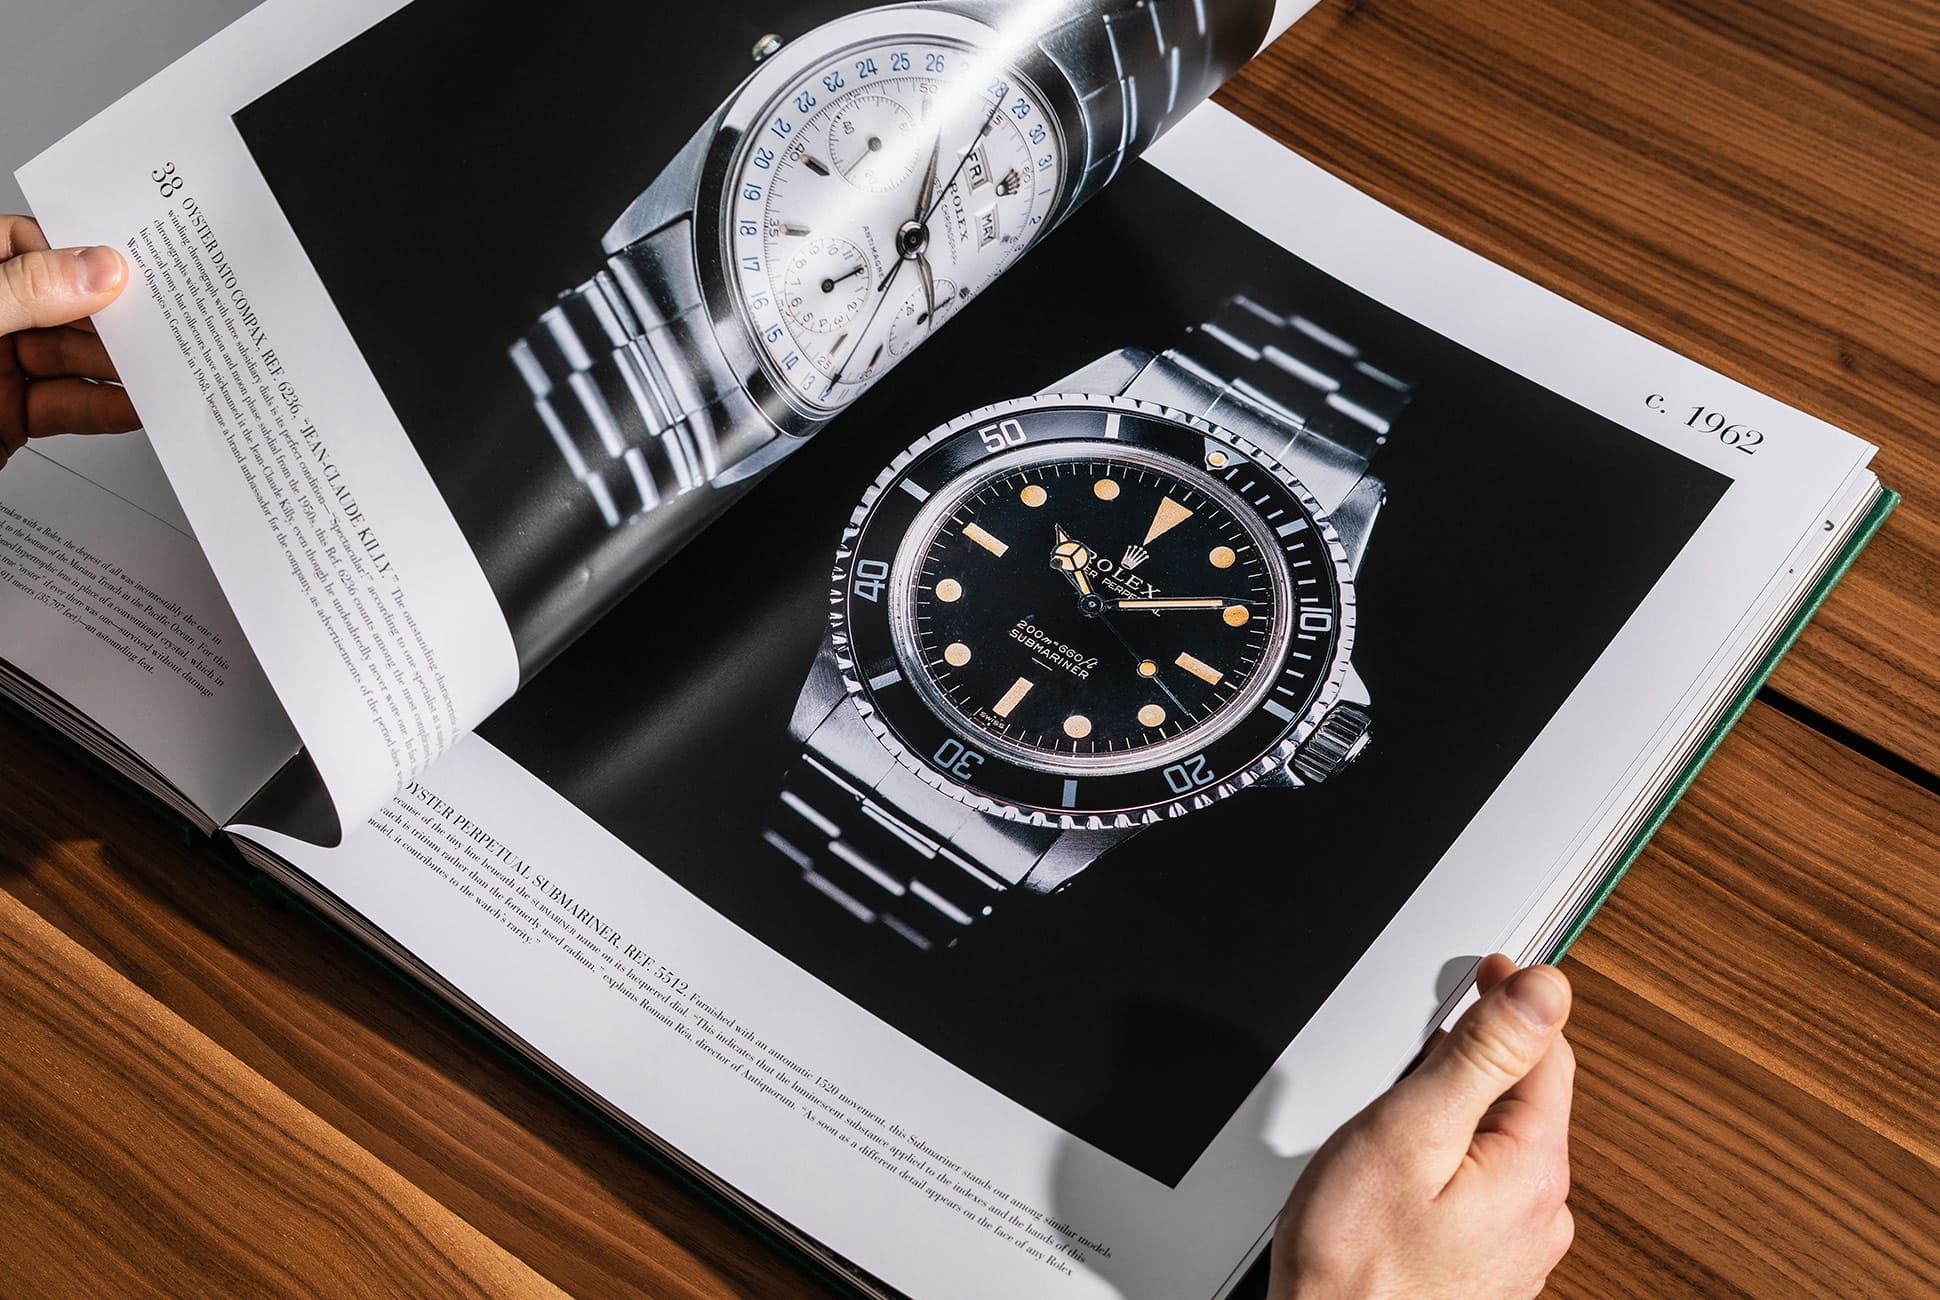 rolex the impossible collection